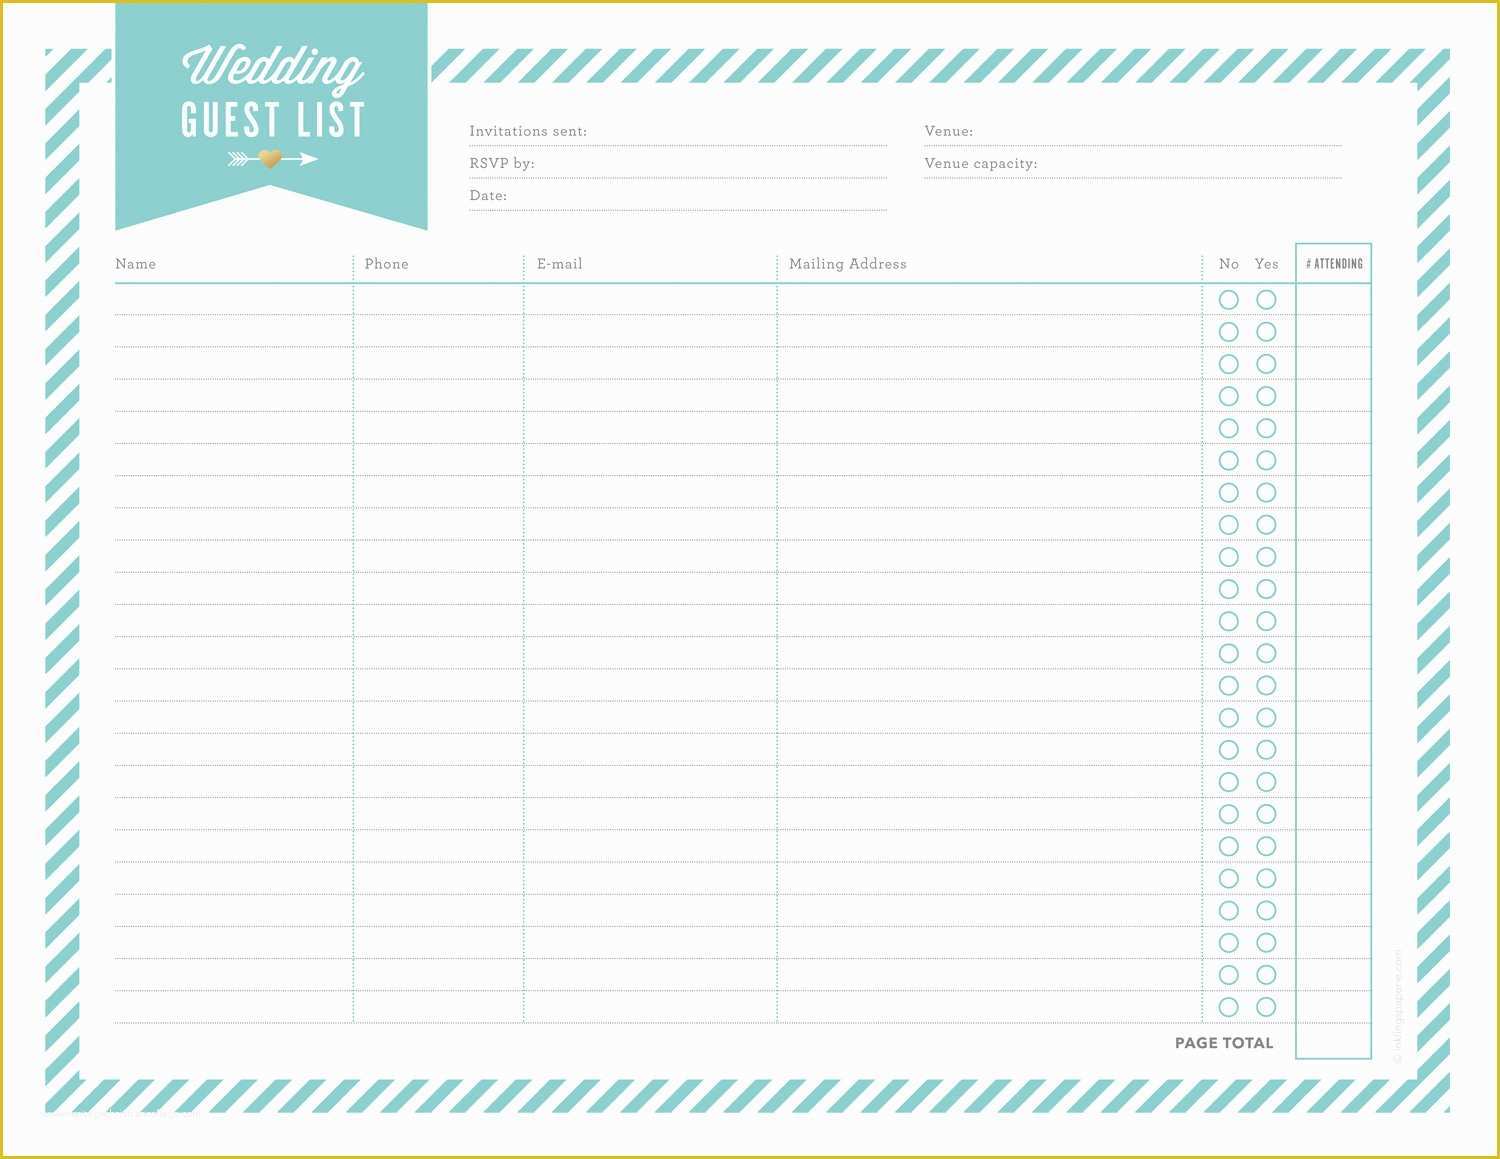 Wedding Planner Template Free Of Wedding Guest List List Free Wedding Planner Templates